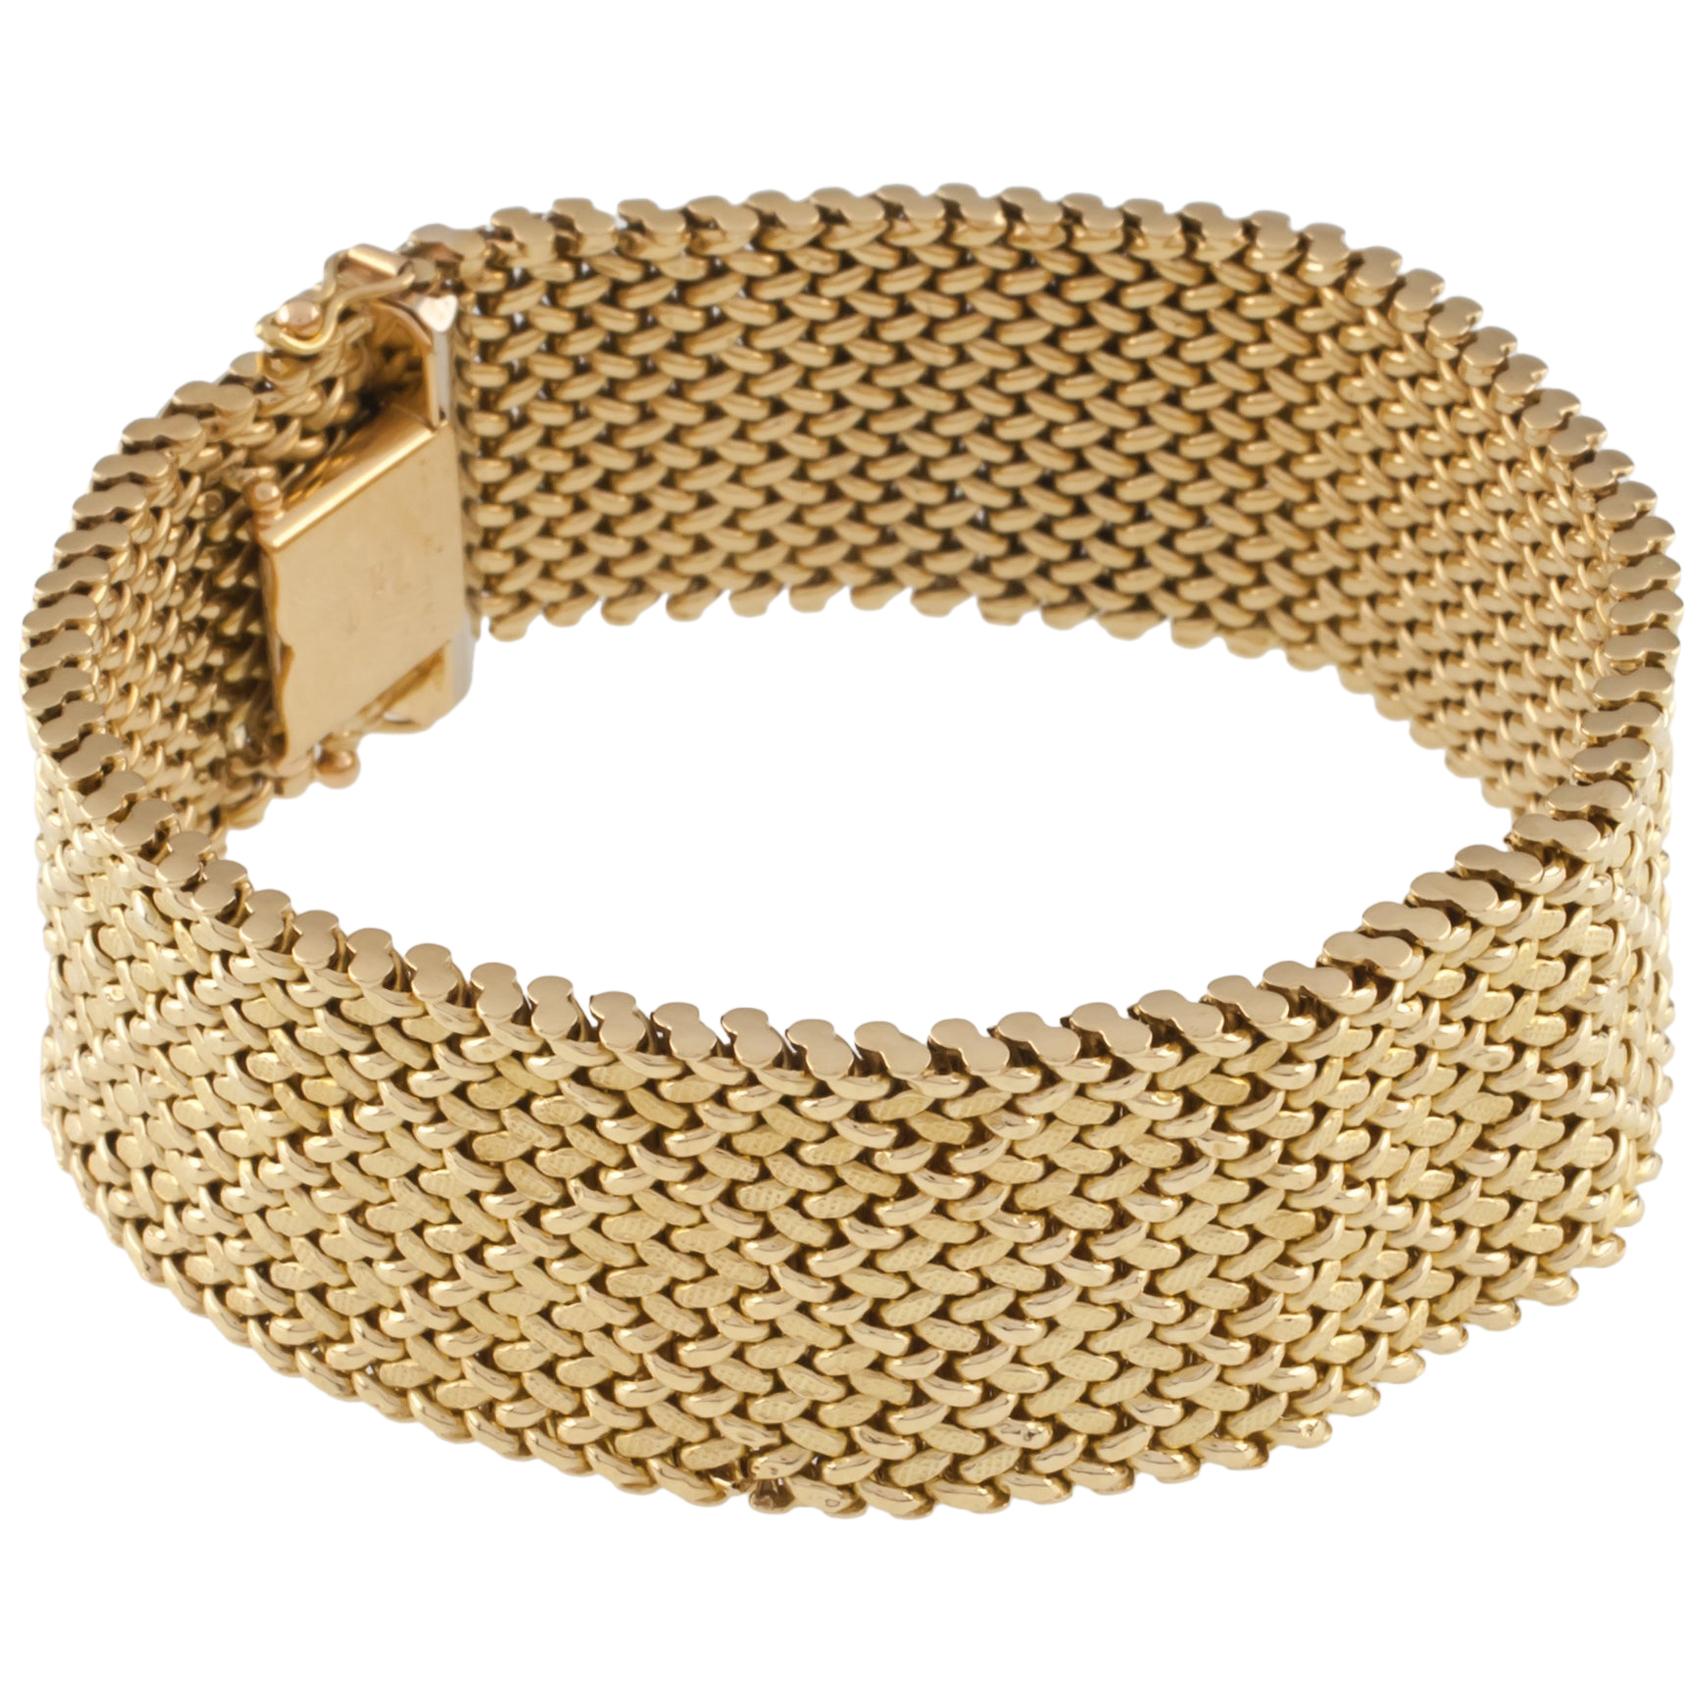 Cartier Yellow Gold Vintage Mesh Bracelet with Harlequin Diamond Pattern For Sale